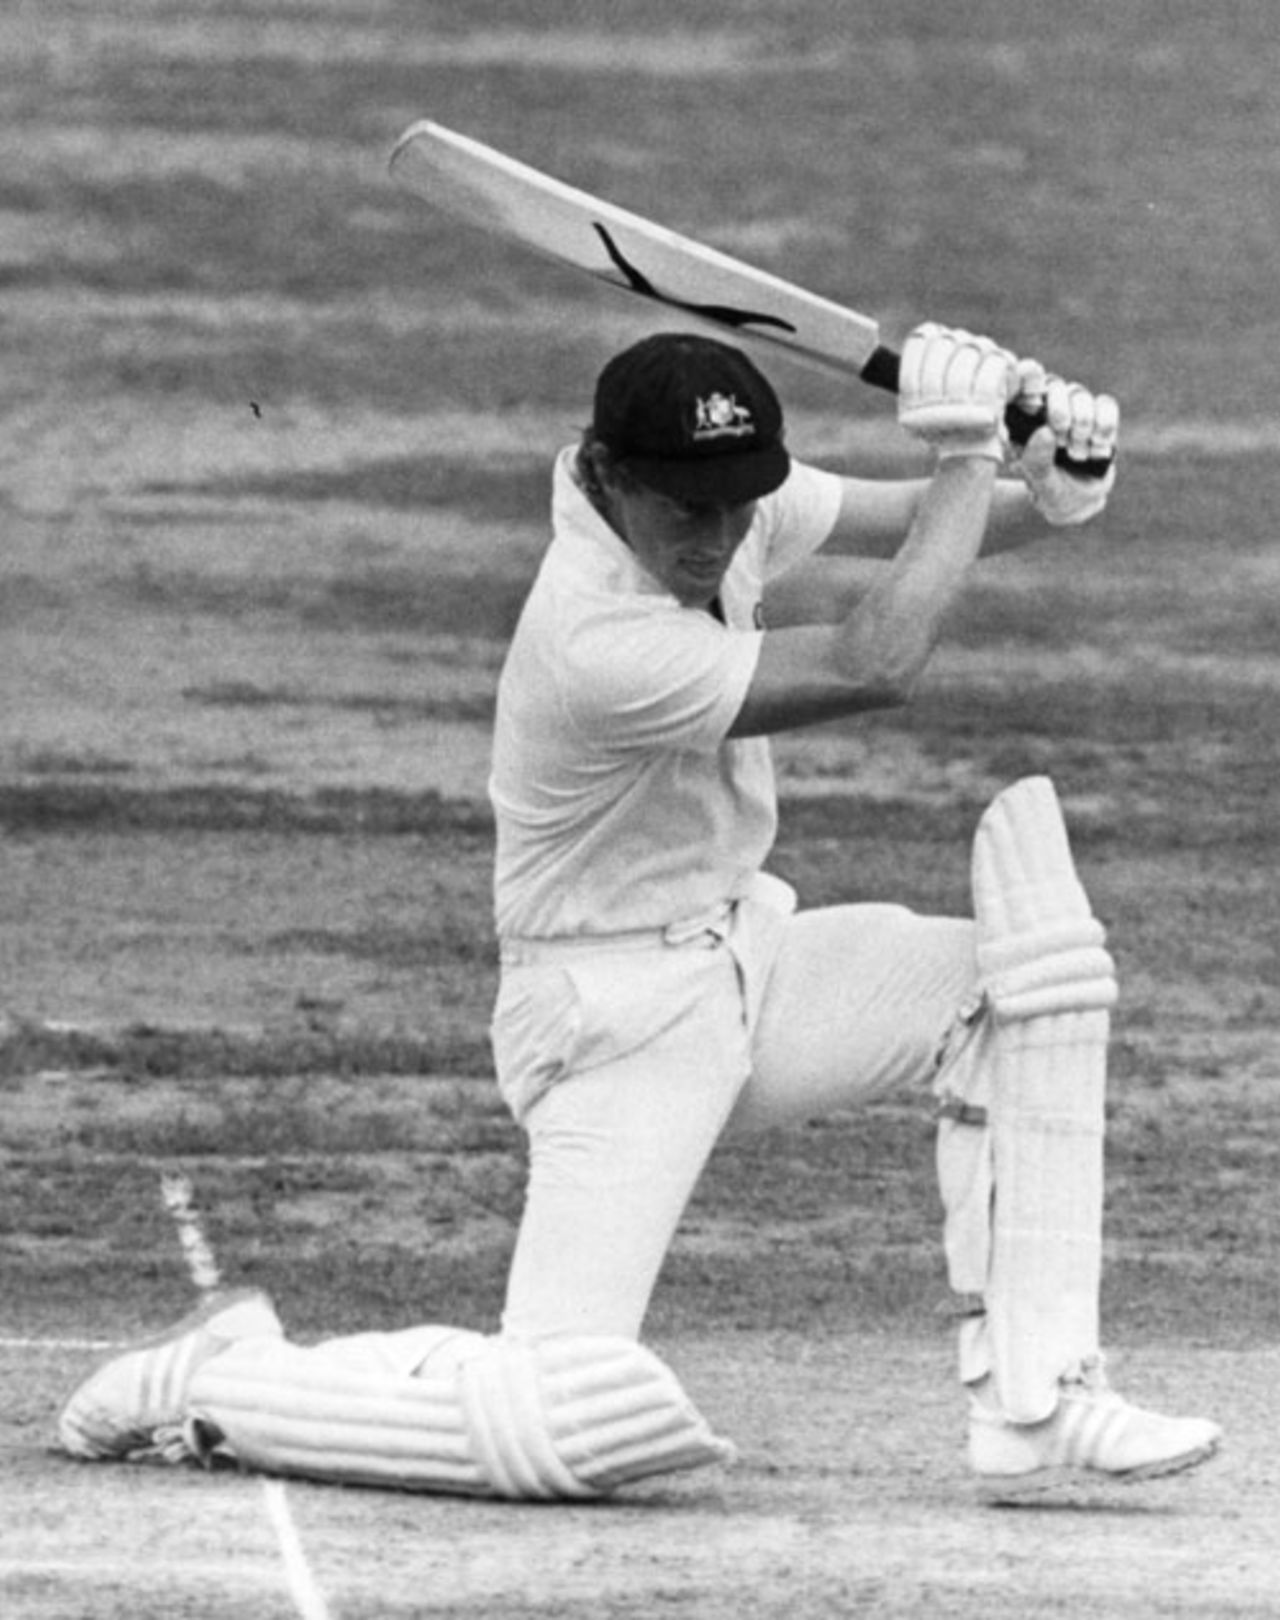 Kim Hughes on the attack during the Centenary Test, England v Australia, Lord's, August 29, 1980